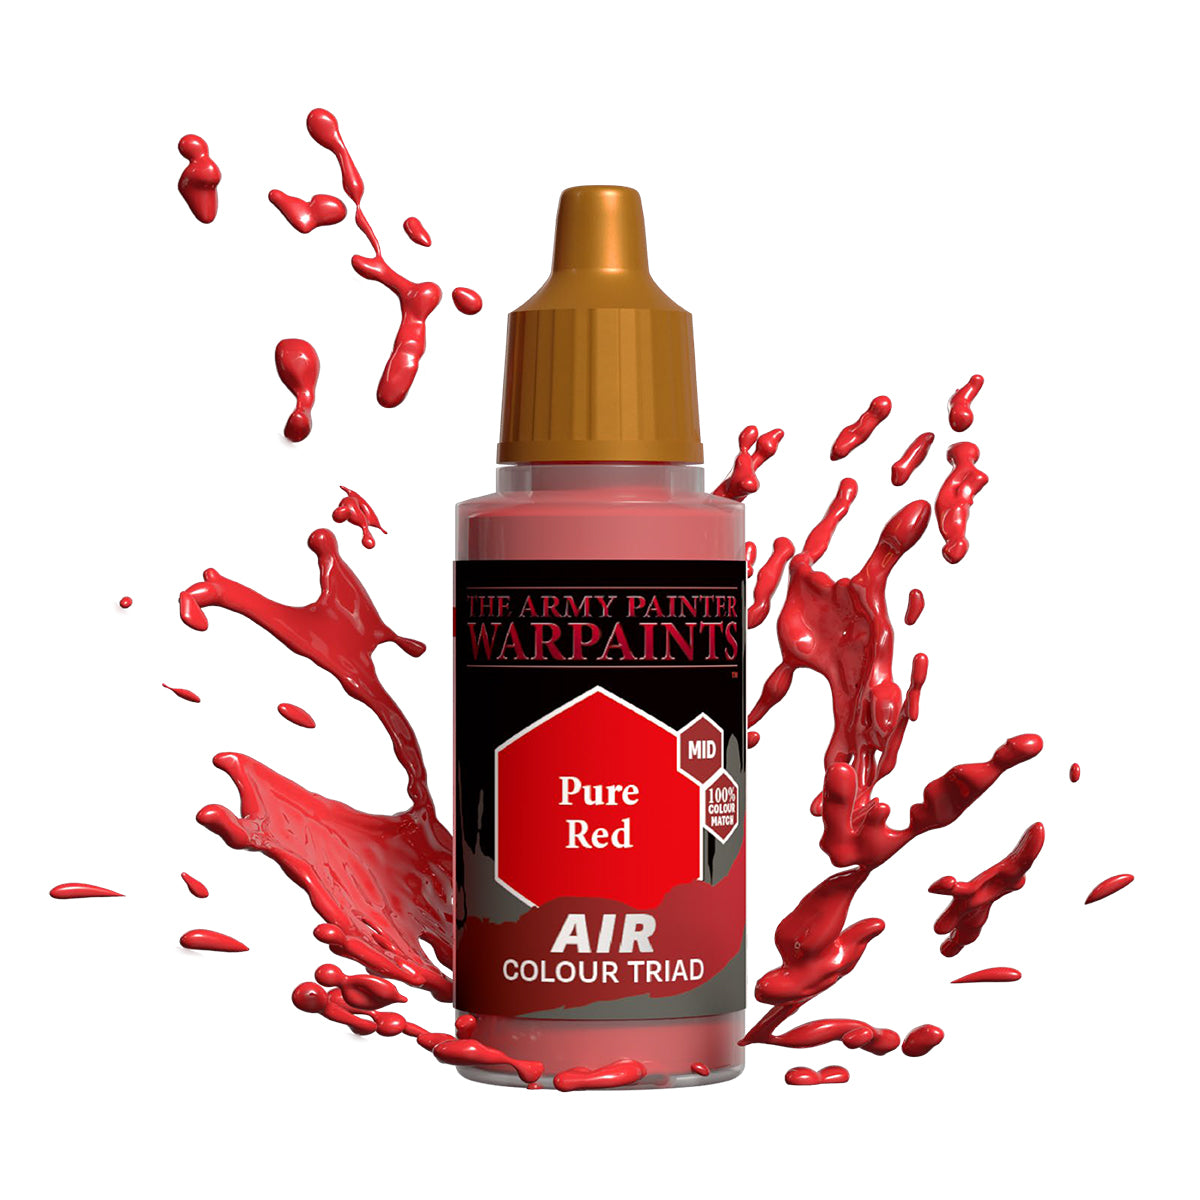 Warpaints Air: Pure Red